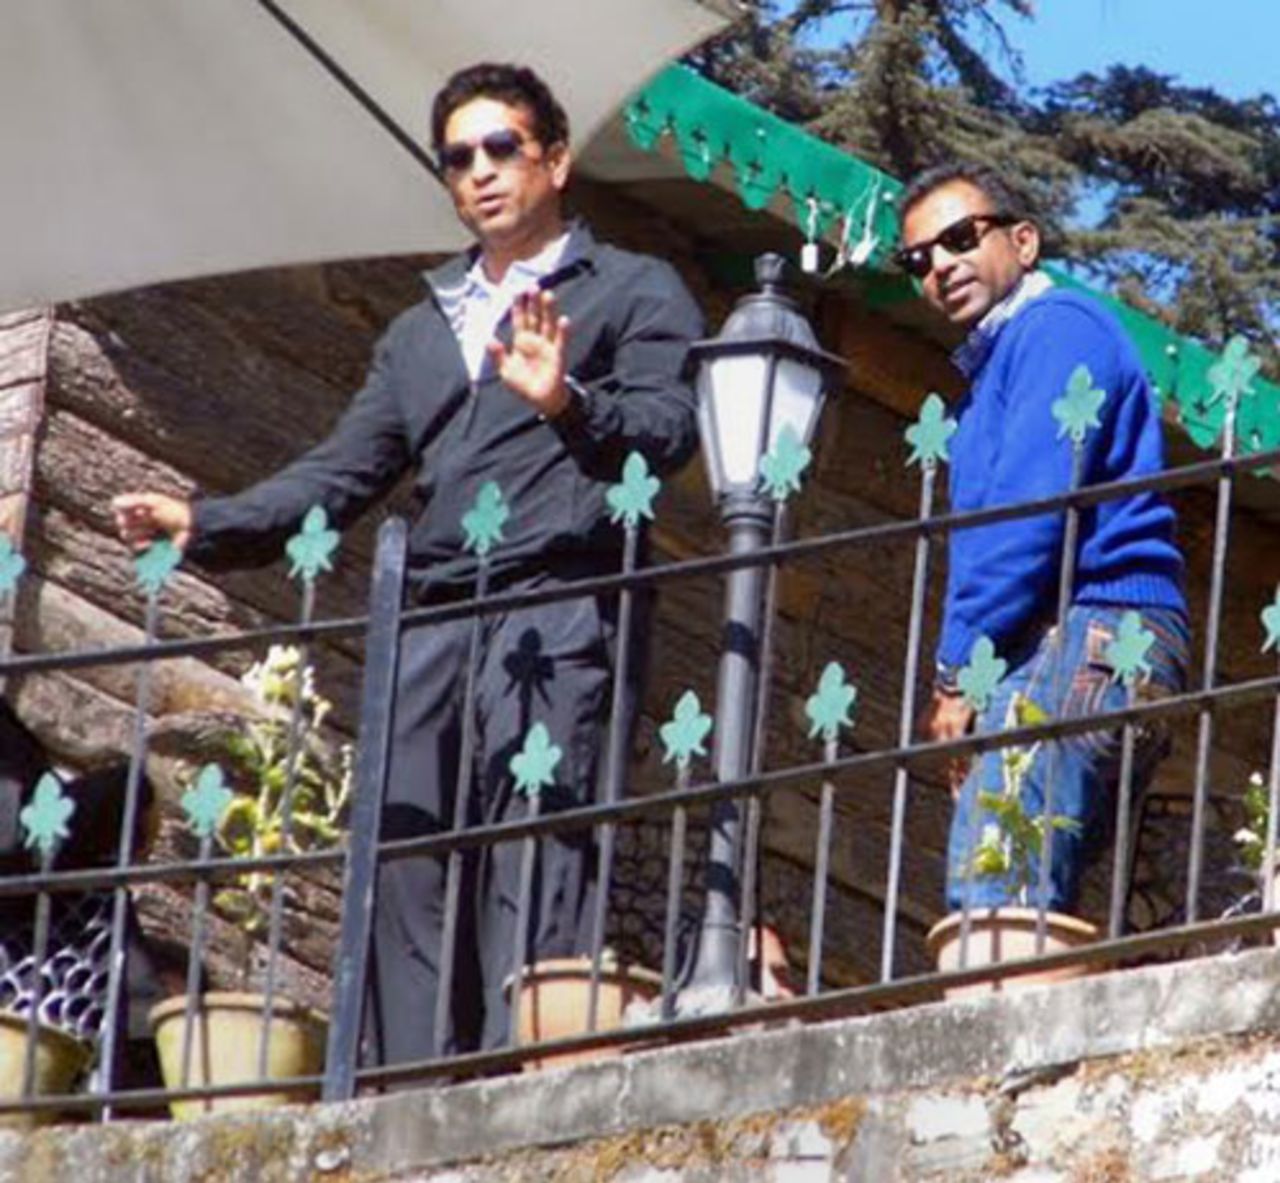 Sachin Tendulkar waves to the media from a private residence in the hill station of Mussoorie, Mussoorie, November 20, 2013